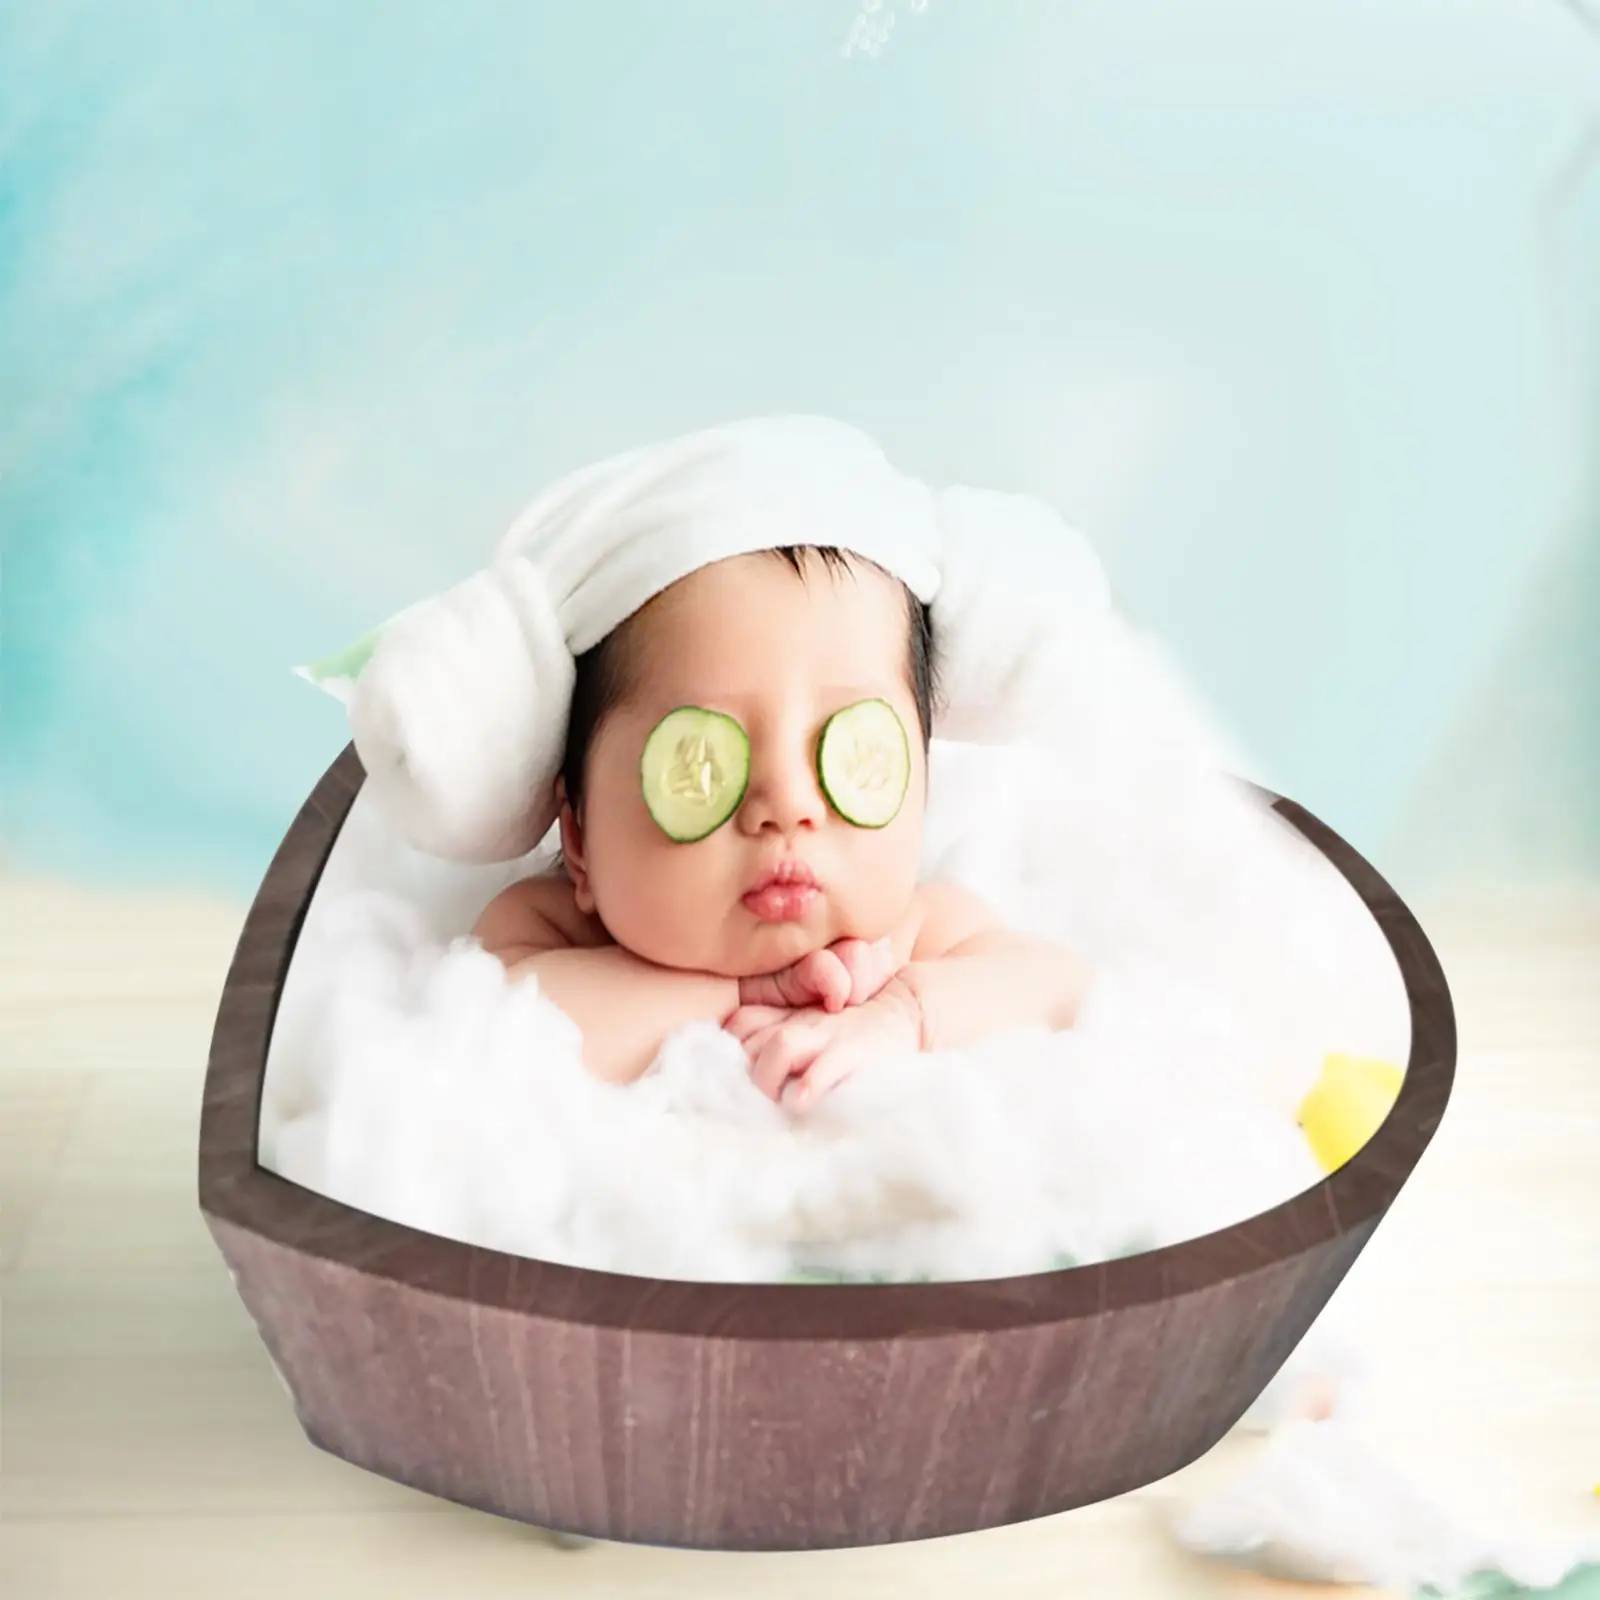 Newborn Infants Photography Props Wood Basin Heart Shaped Accessory Baby Cot